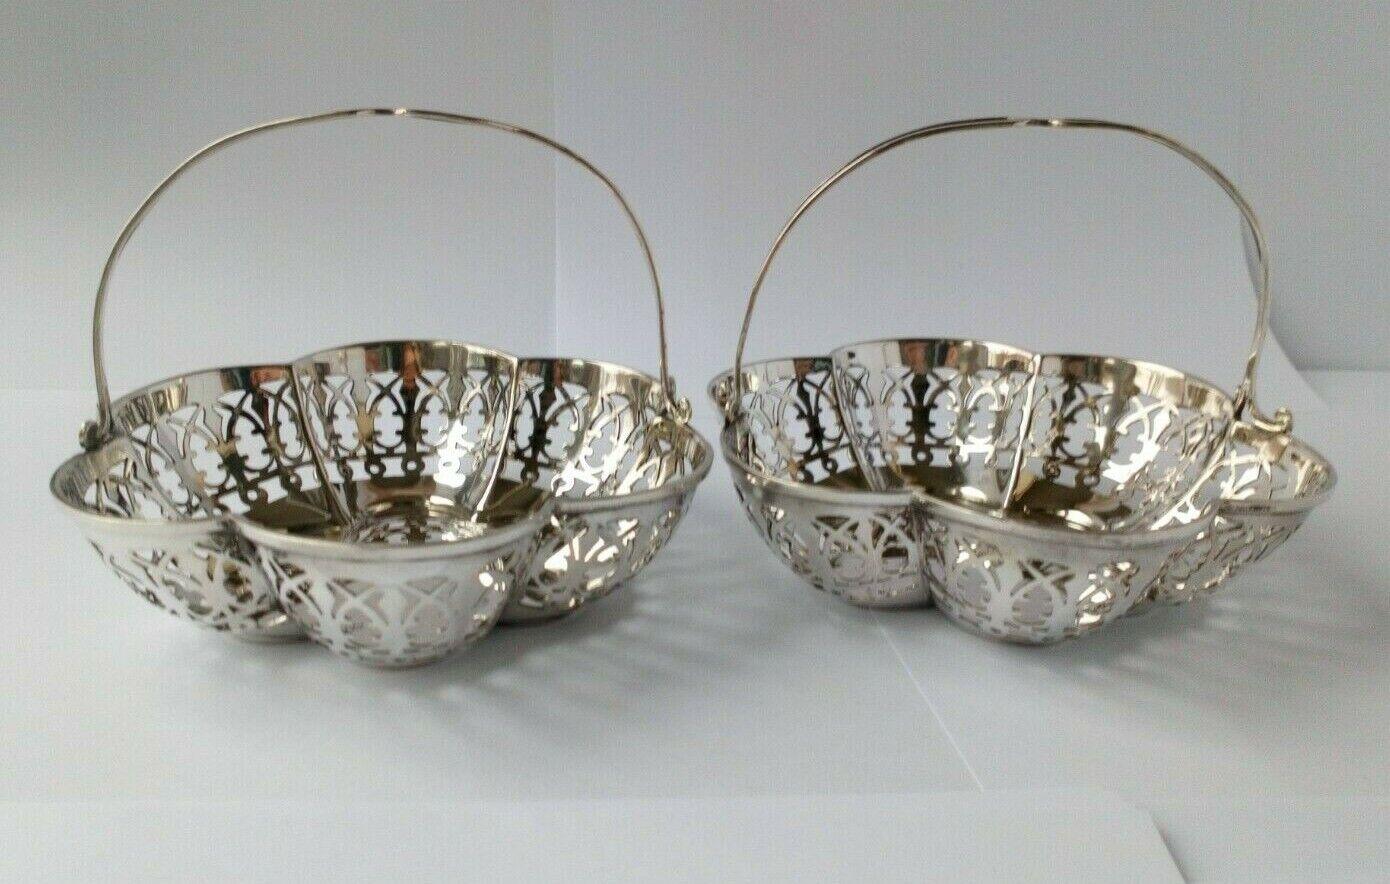 Pair of Pierced Sterling Silver Bonbon Dishes by James Deakin & Sons

In very good condition, this is a beautiful pair of dishes. They would look lovely with sweets, nuts or even as they are. Hallmarked: Made by James Deakin & Sons (John & William F